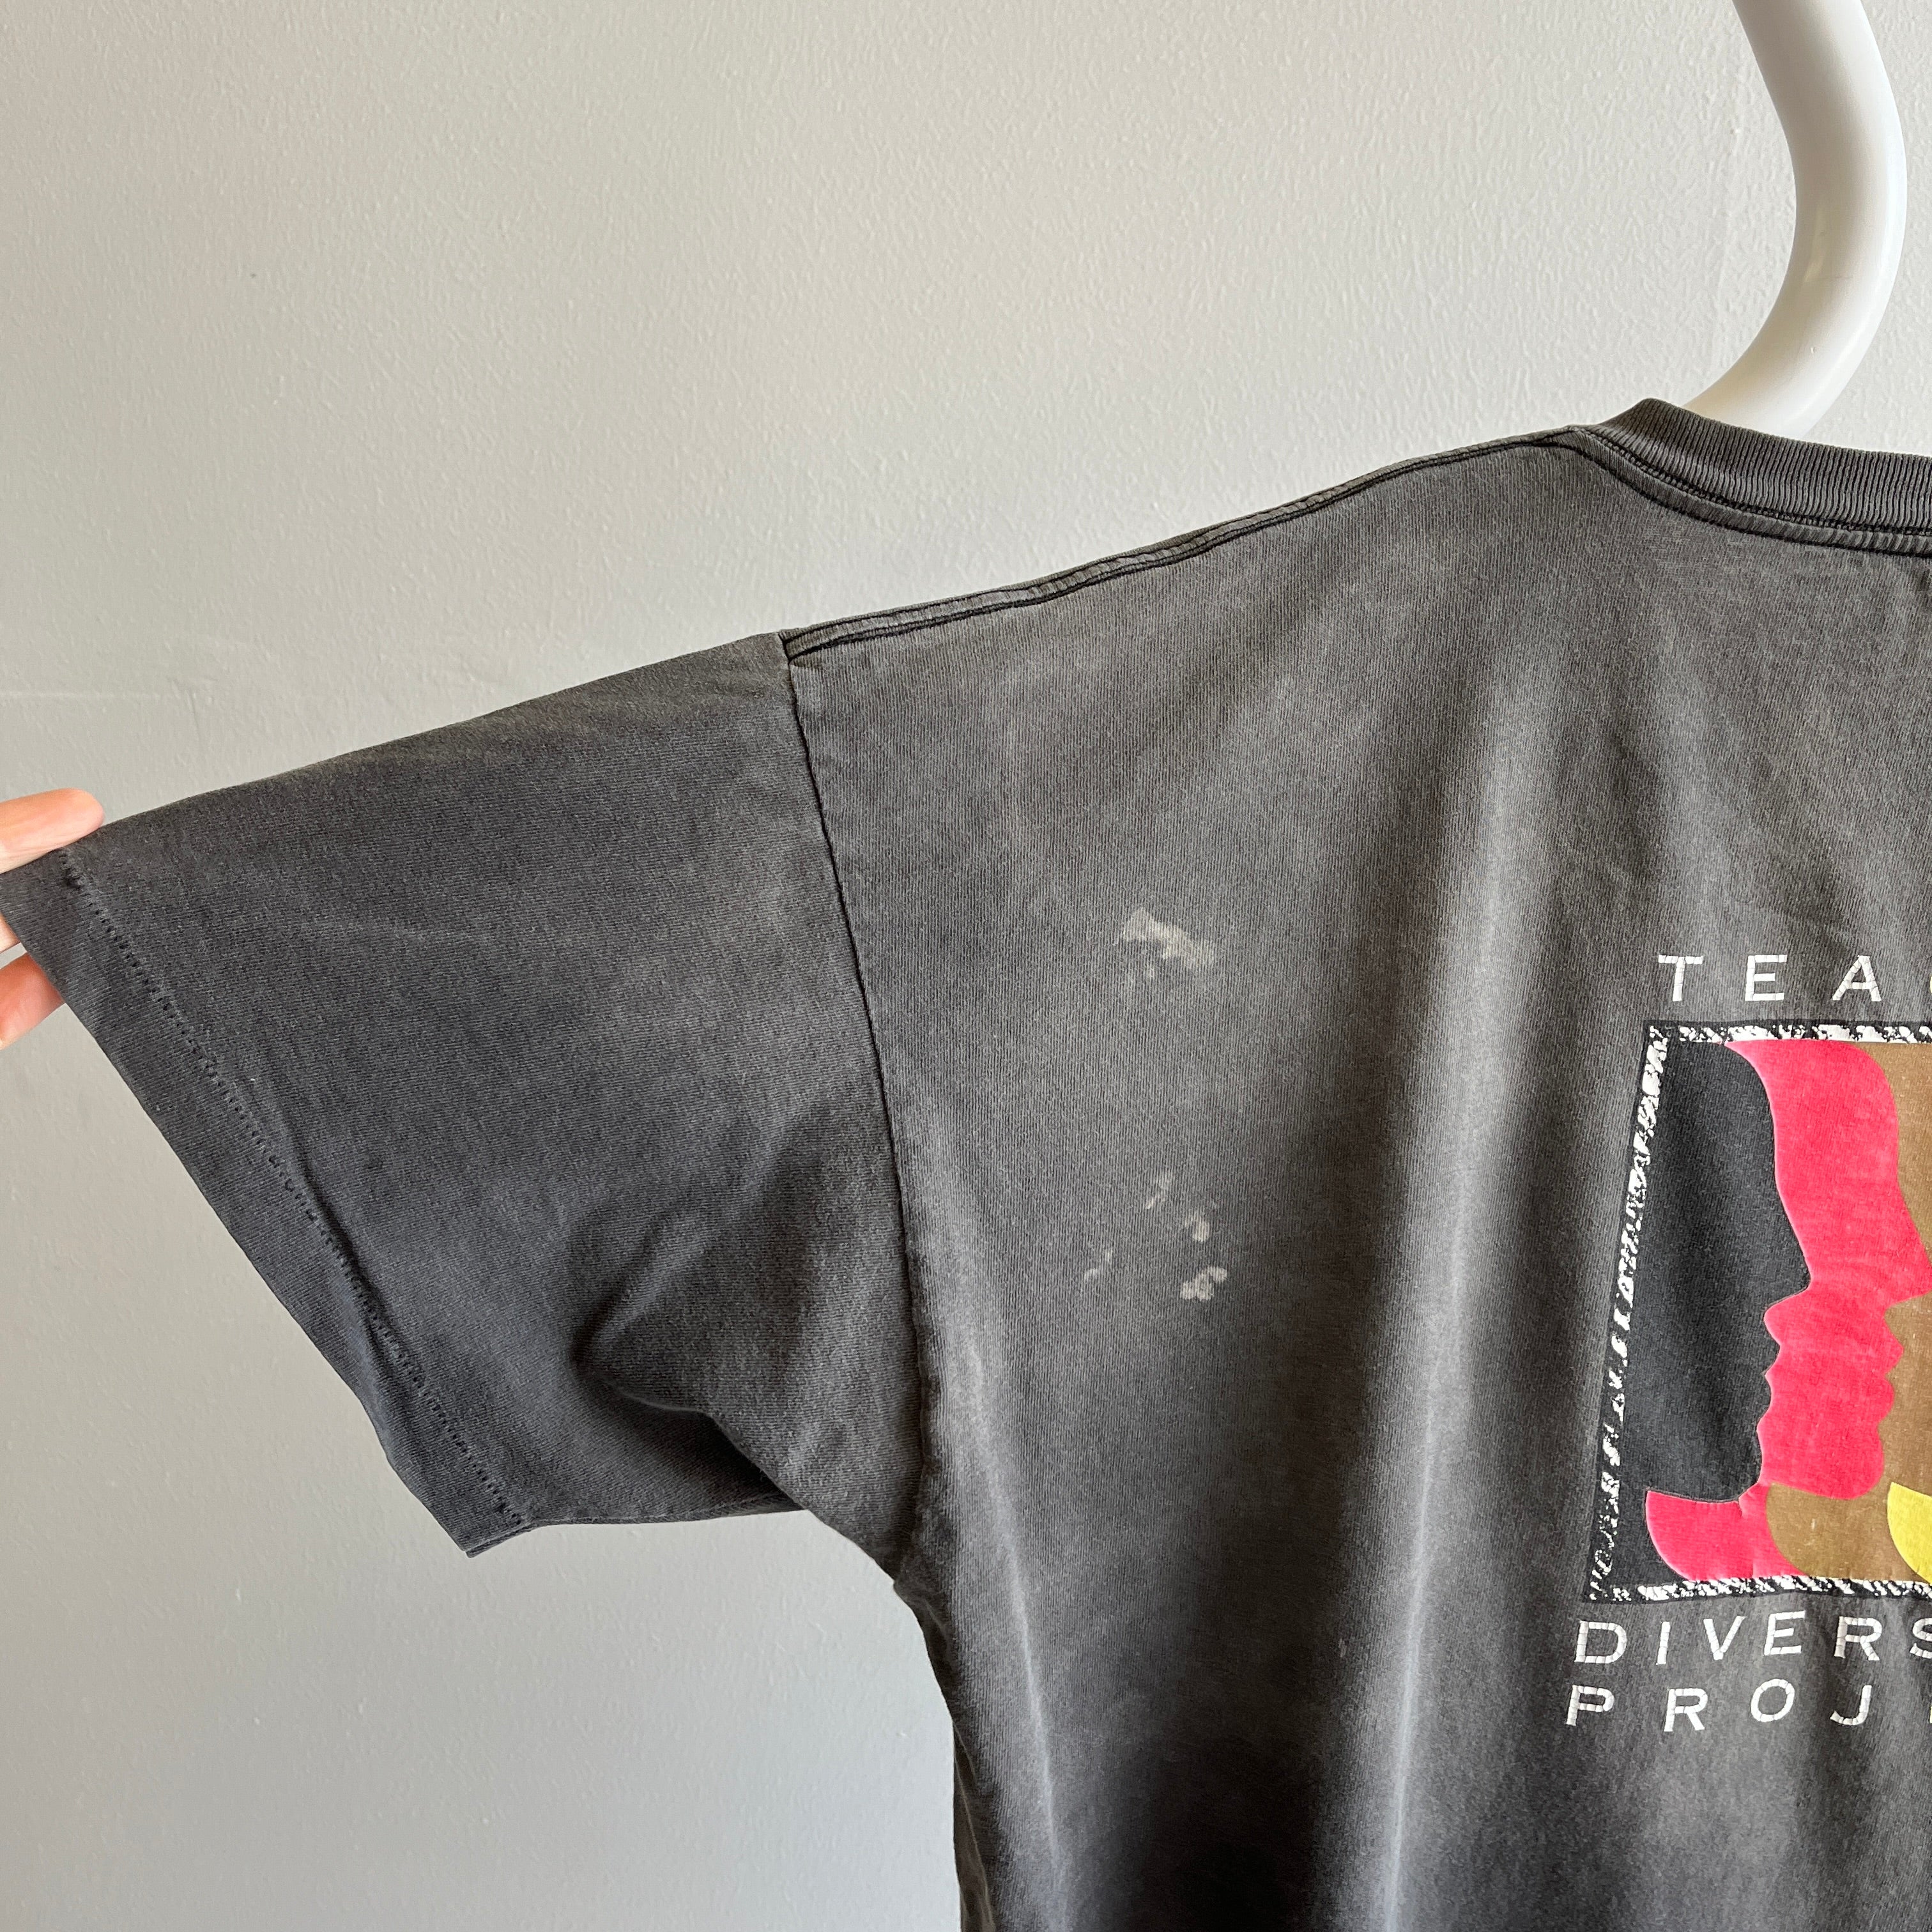 1990s OSFMany Epically Faded Cal Poly Diversity Project T-Shirt - THRASHED!!!!